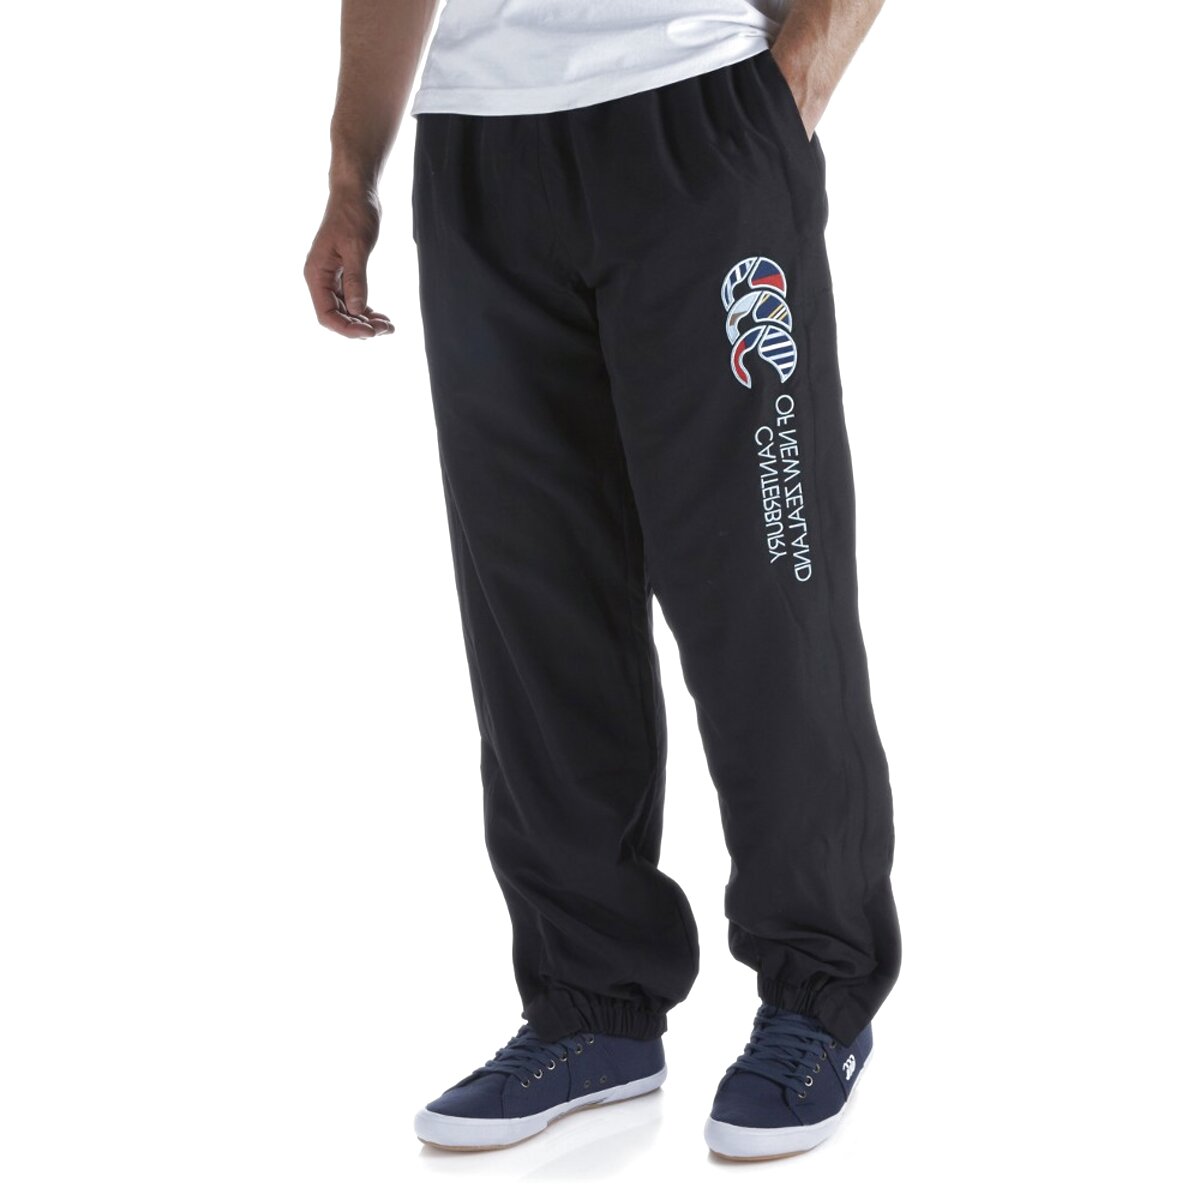 Canterbury Joggers for sale in UK | 58 used Canterbury Joggers